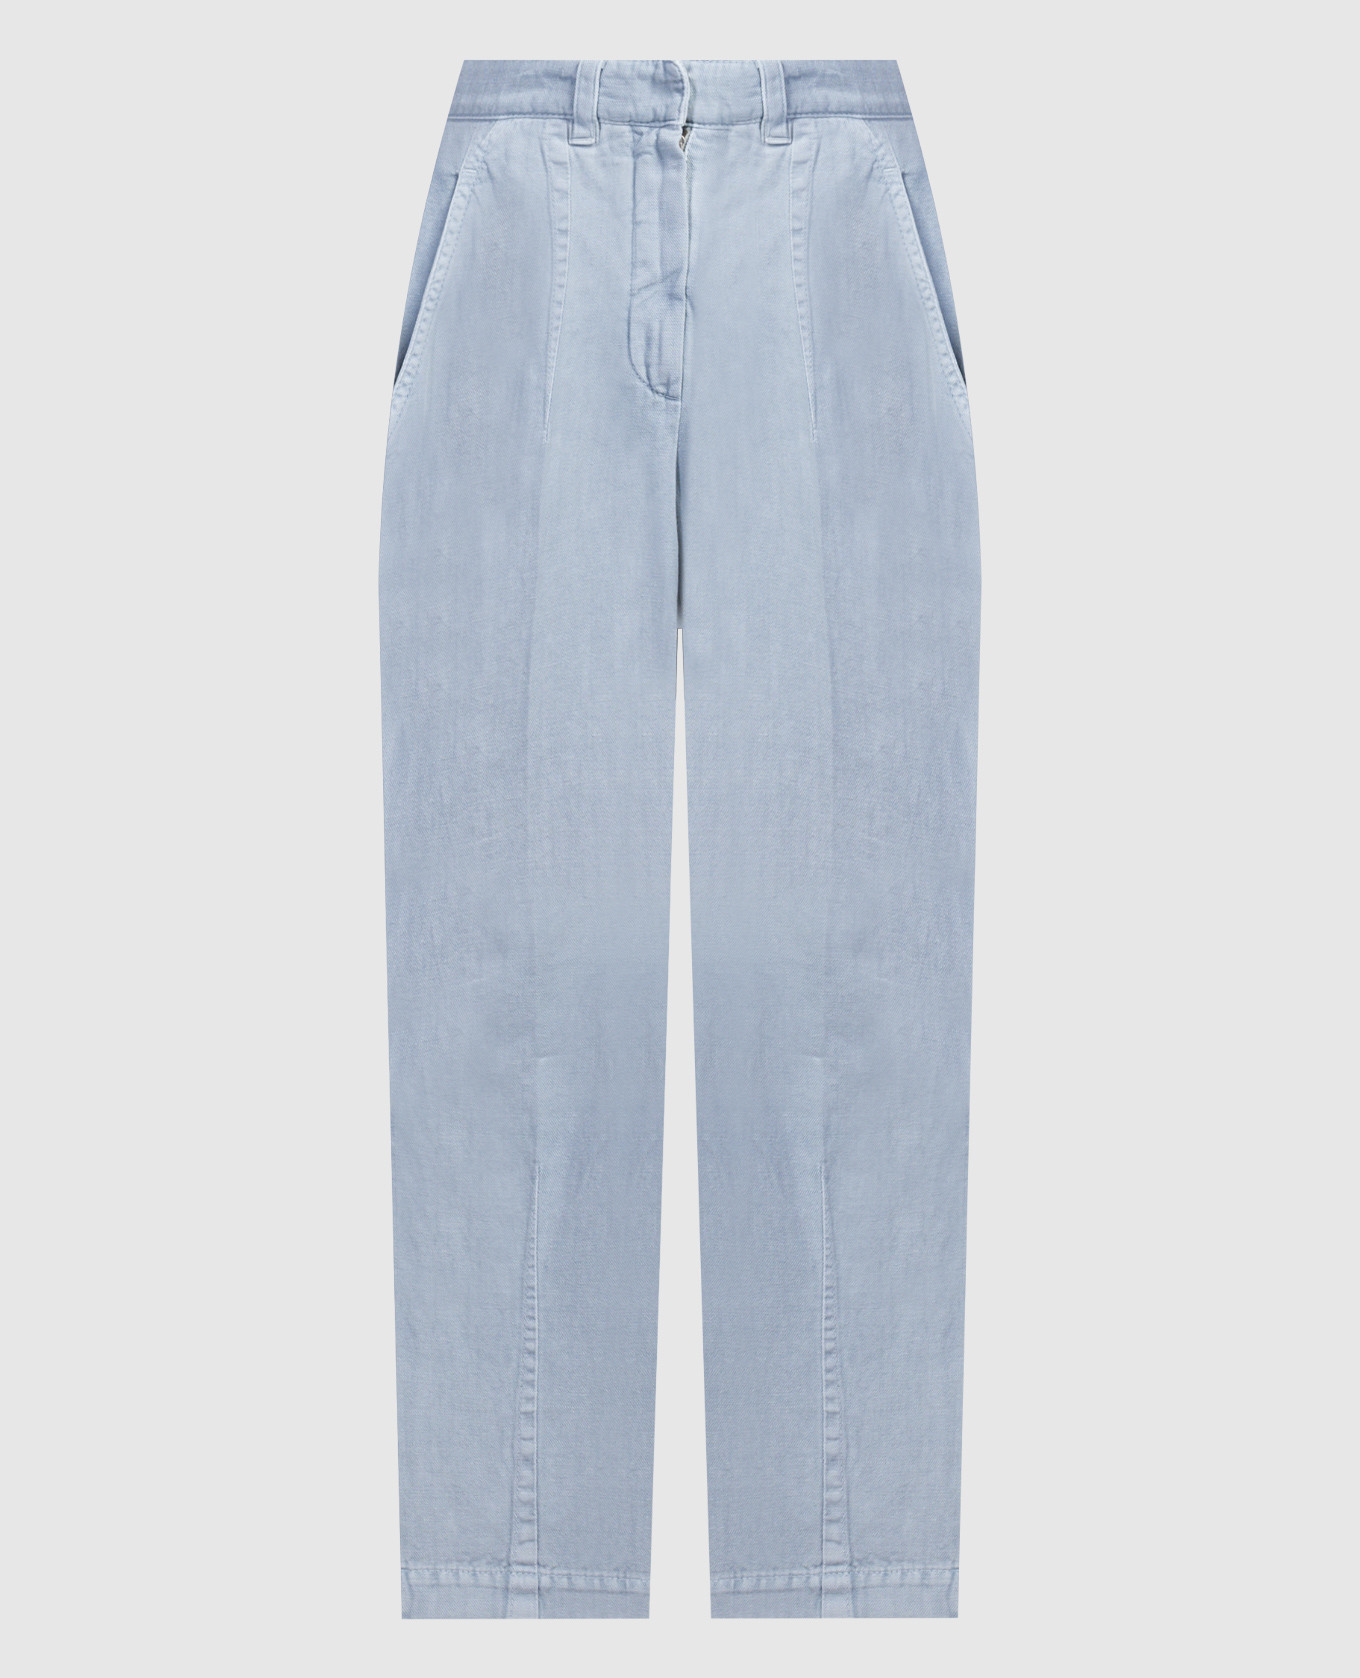 Blue pants with linen